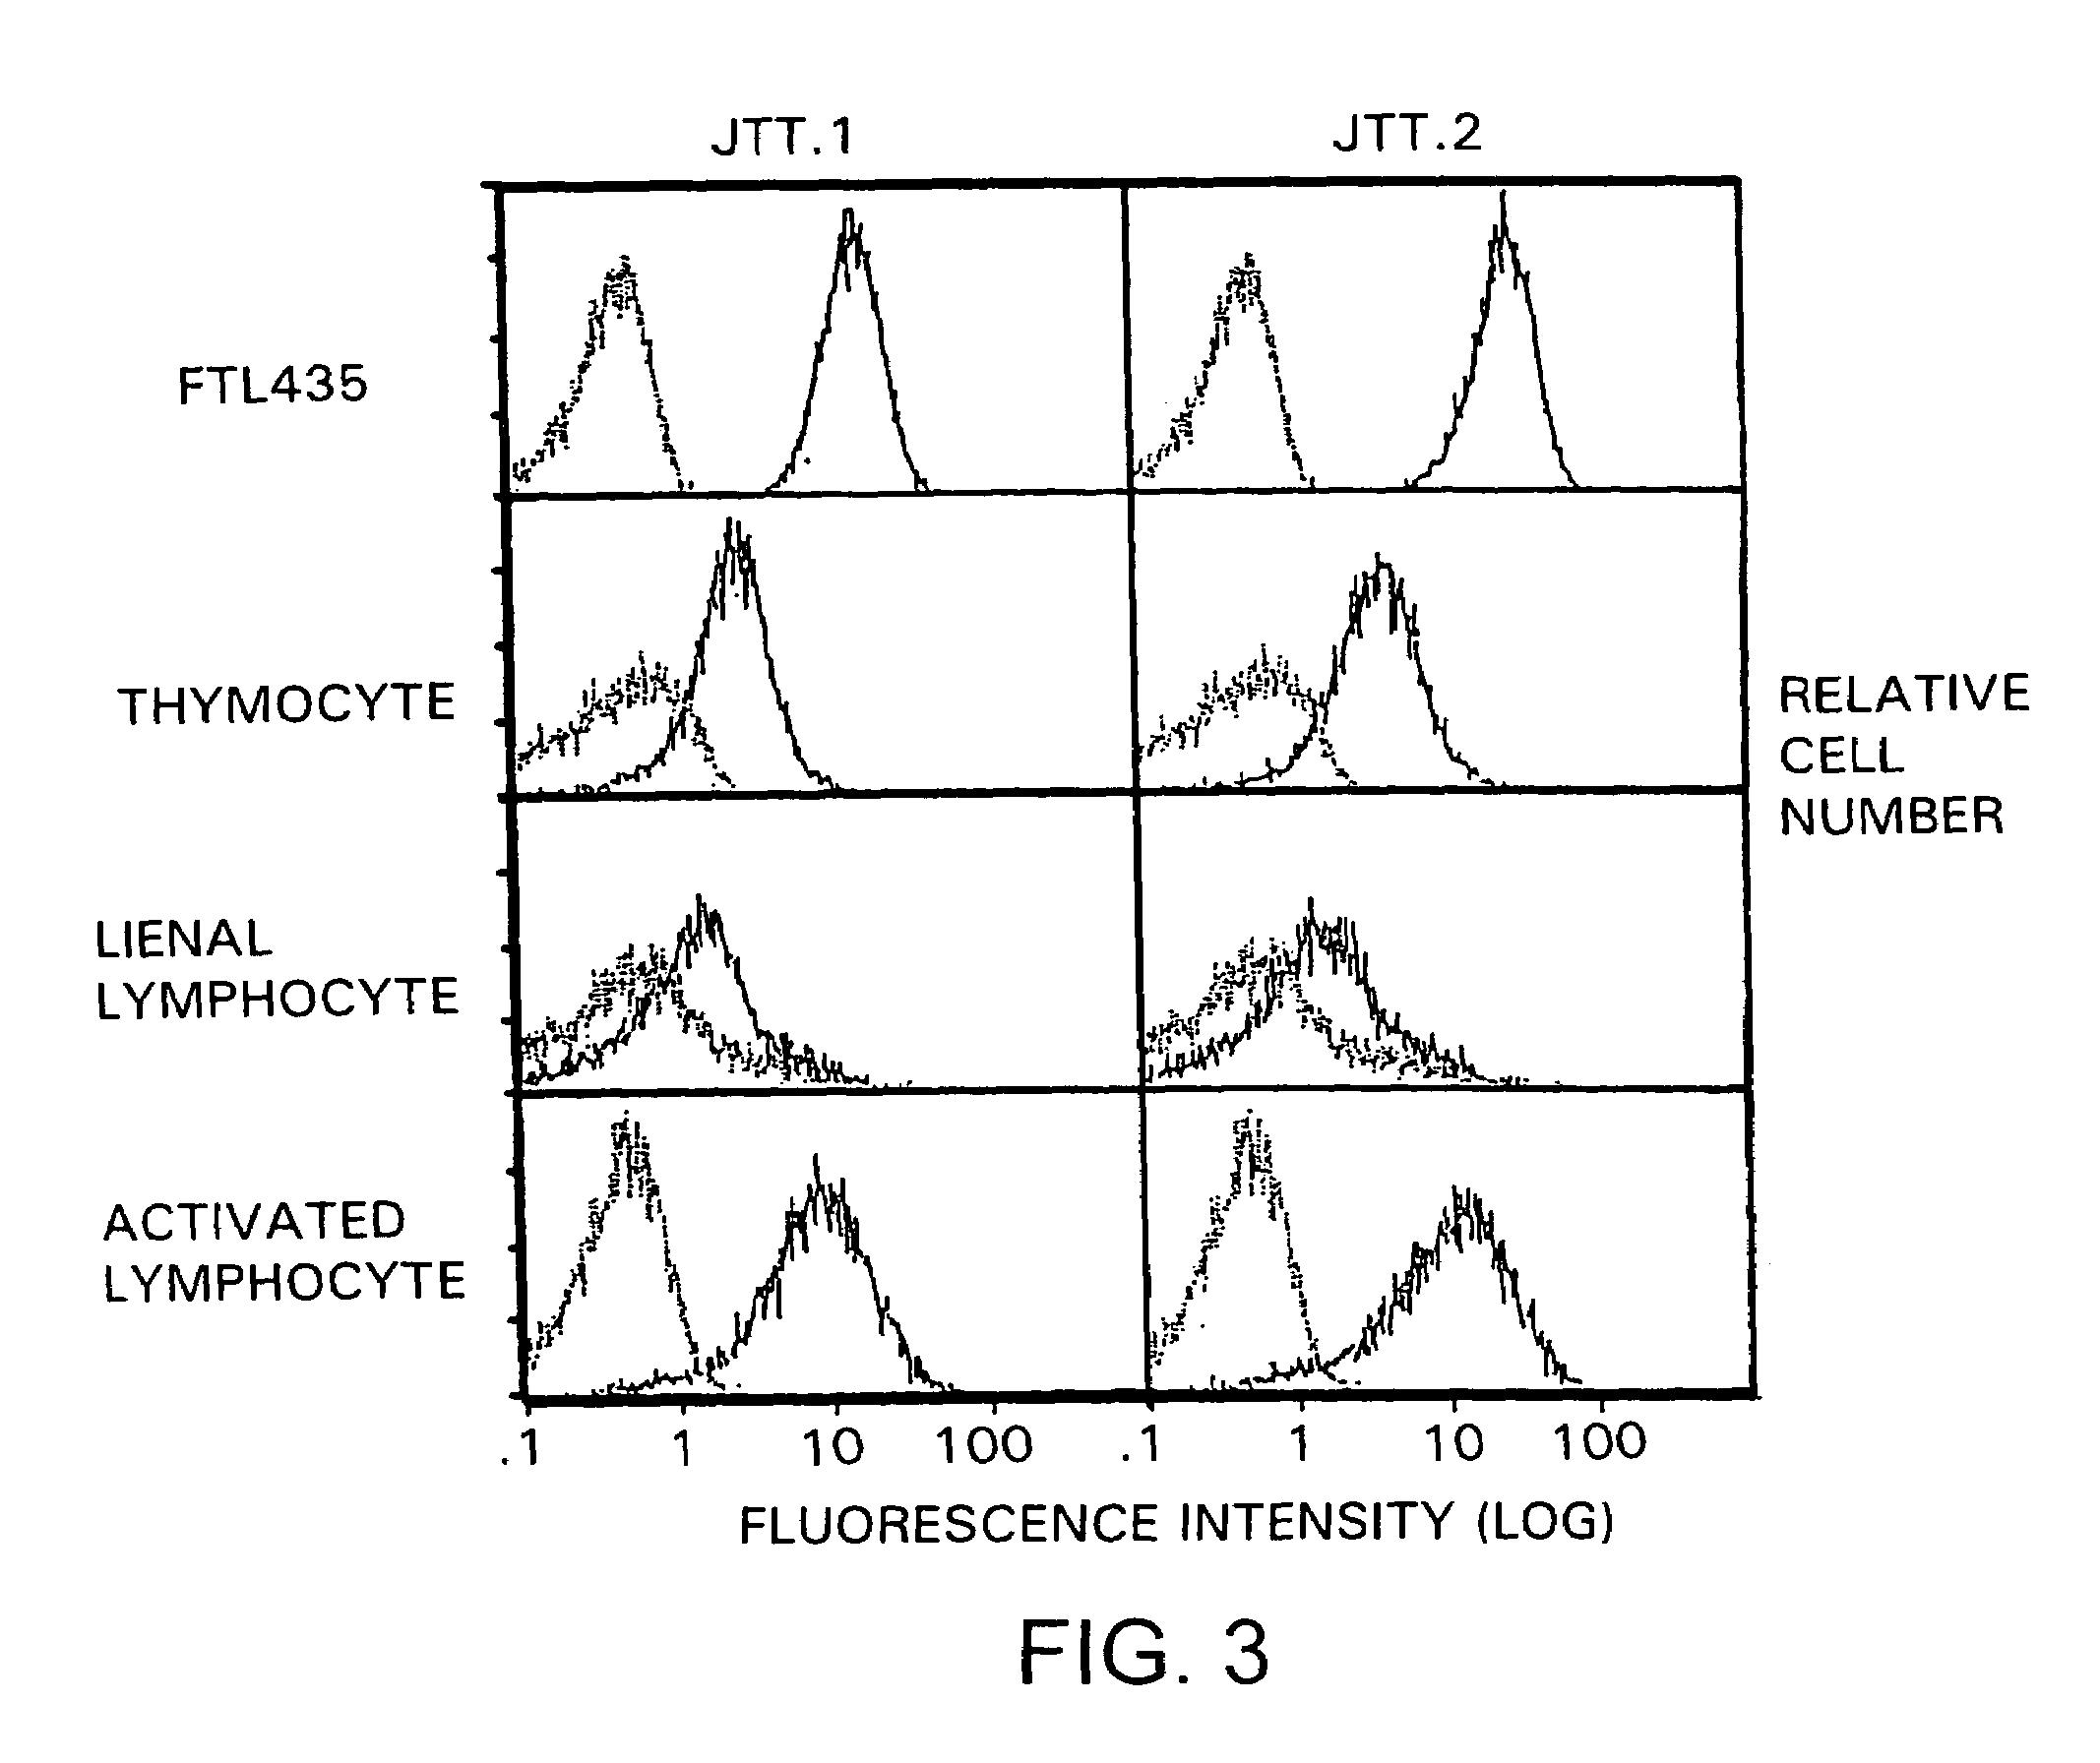 JTT-1 protein and methods of inhibiting lymphocyte activation